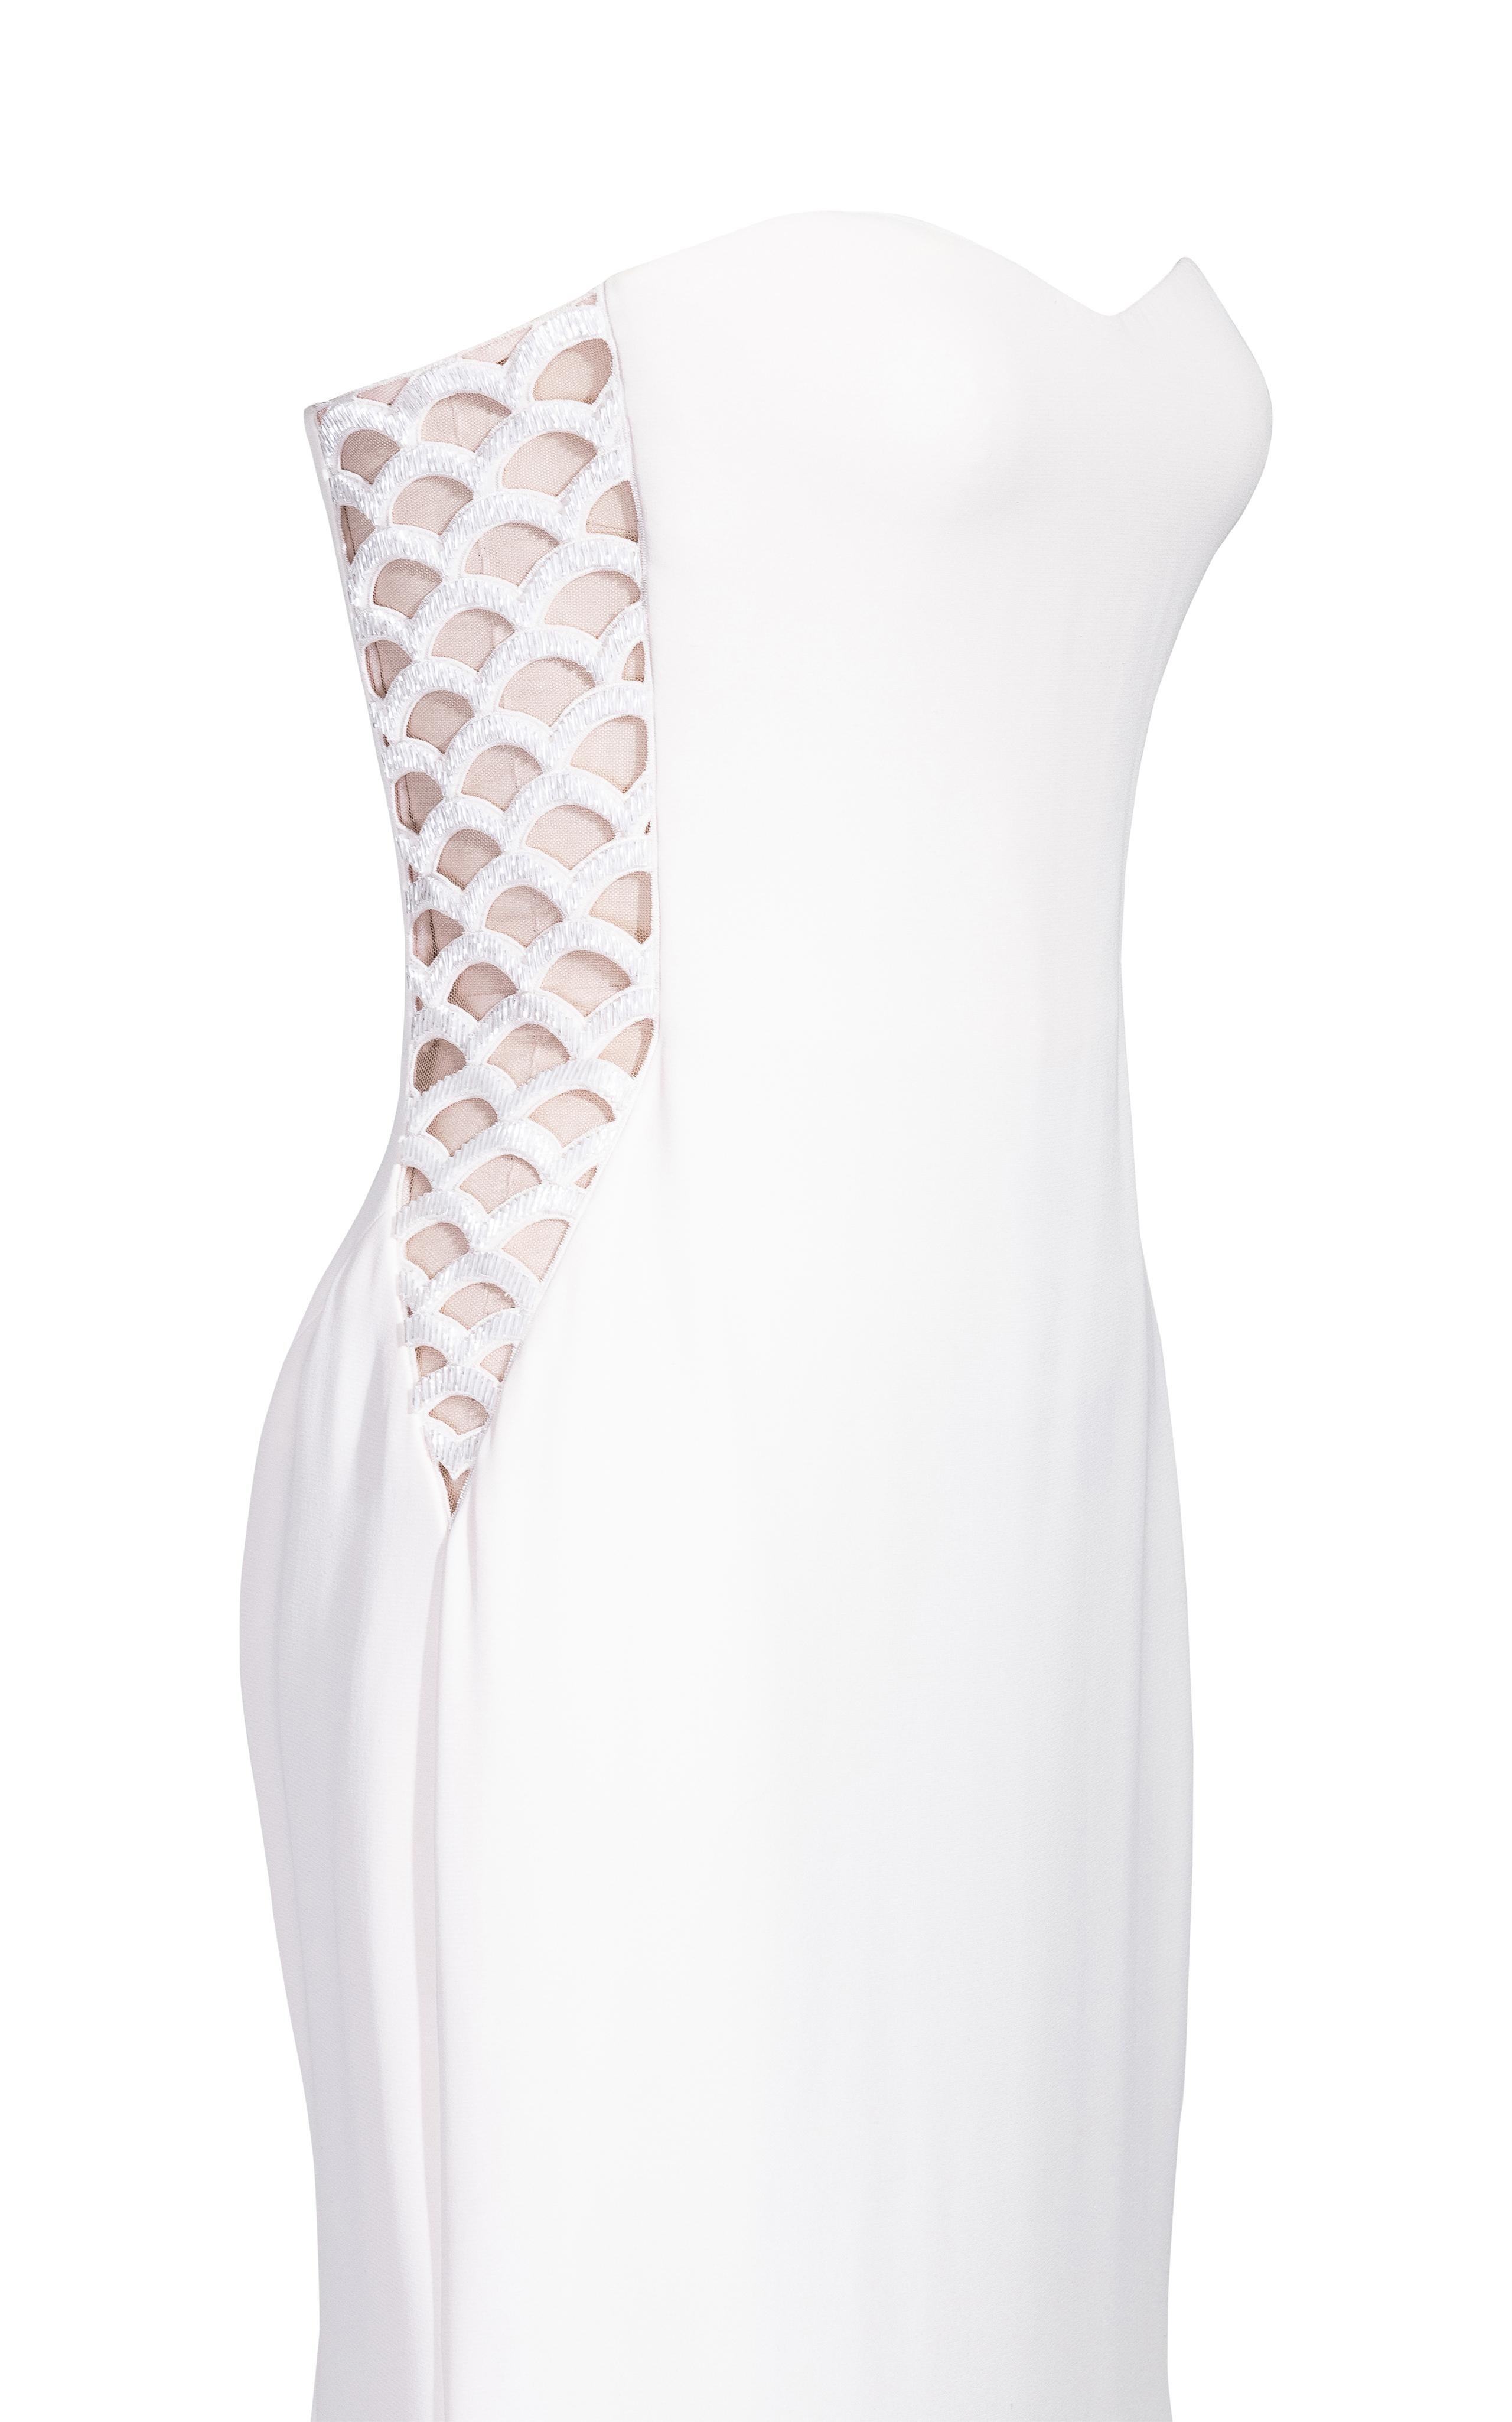 Women's 1990's Gianni Versace Couture White Embellished Side Cutout Gown